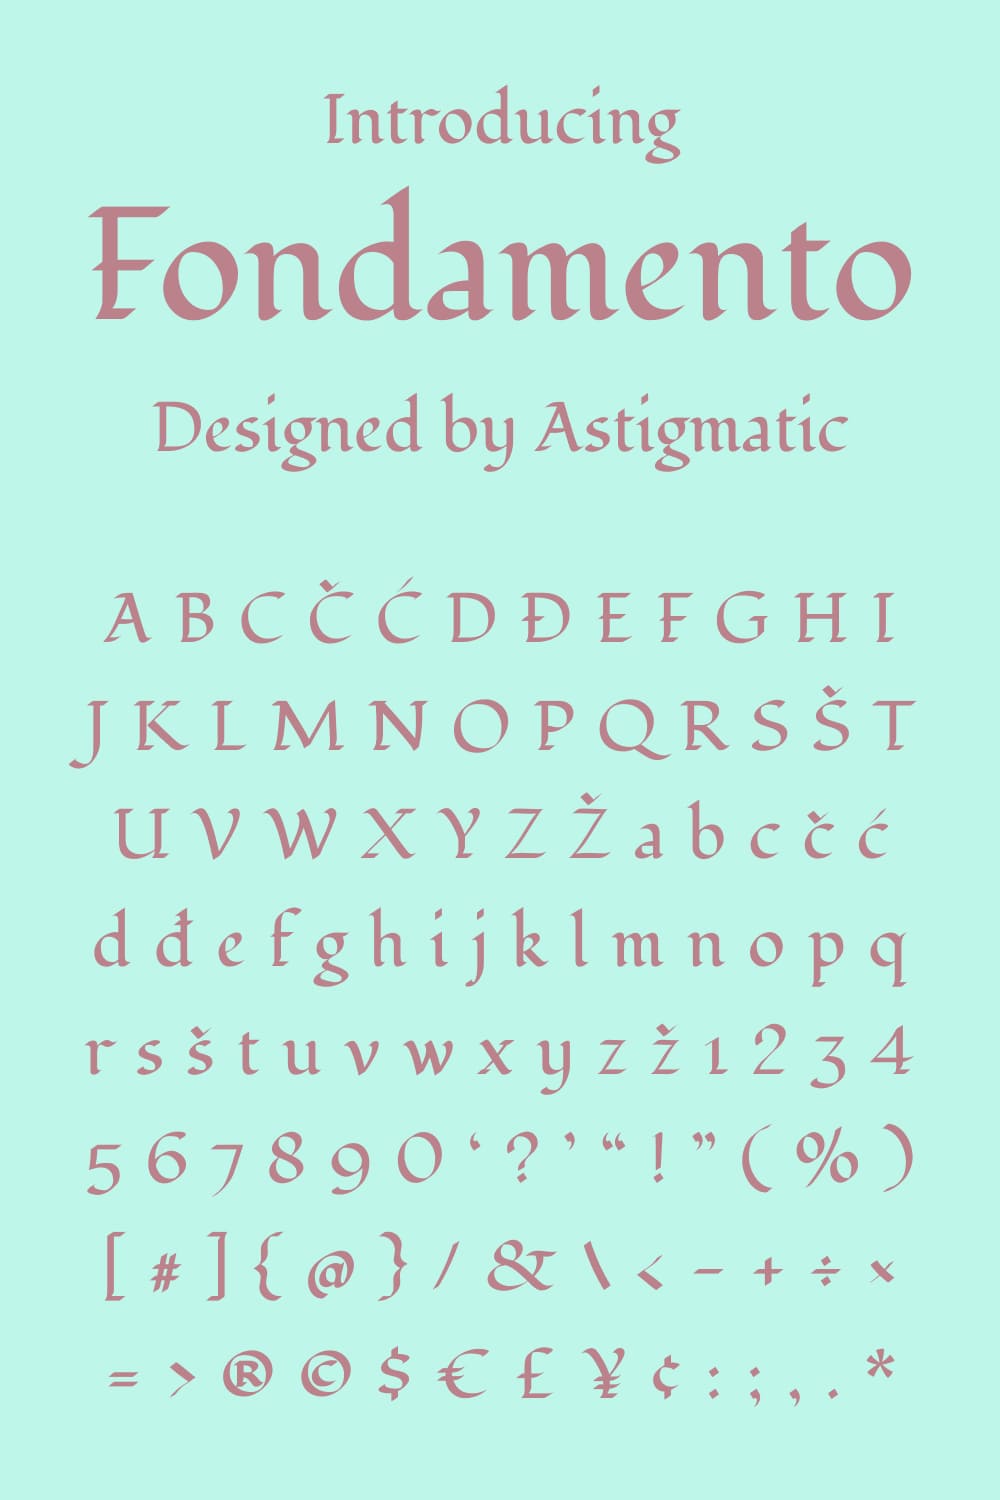 Fondamento is calligraphic lettering styles based on the traditional Foundational Hand, a basic teaching style.